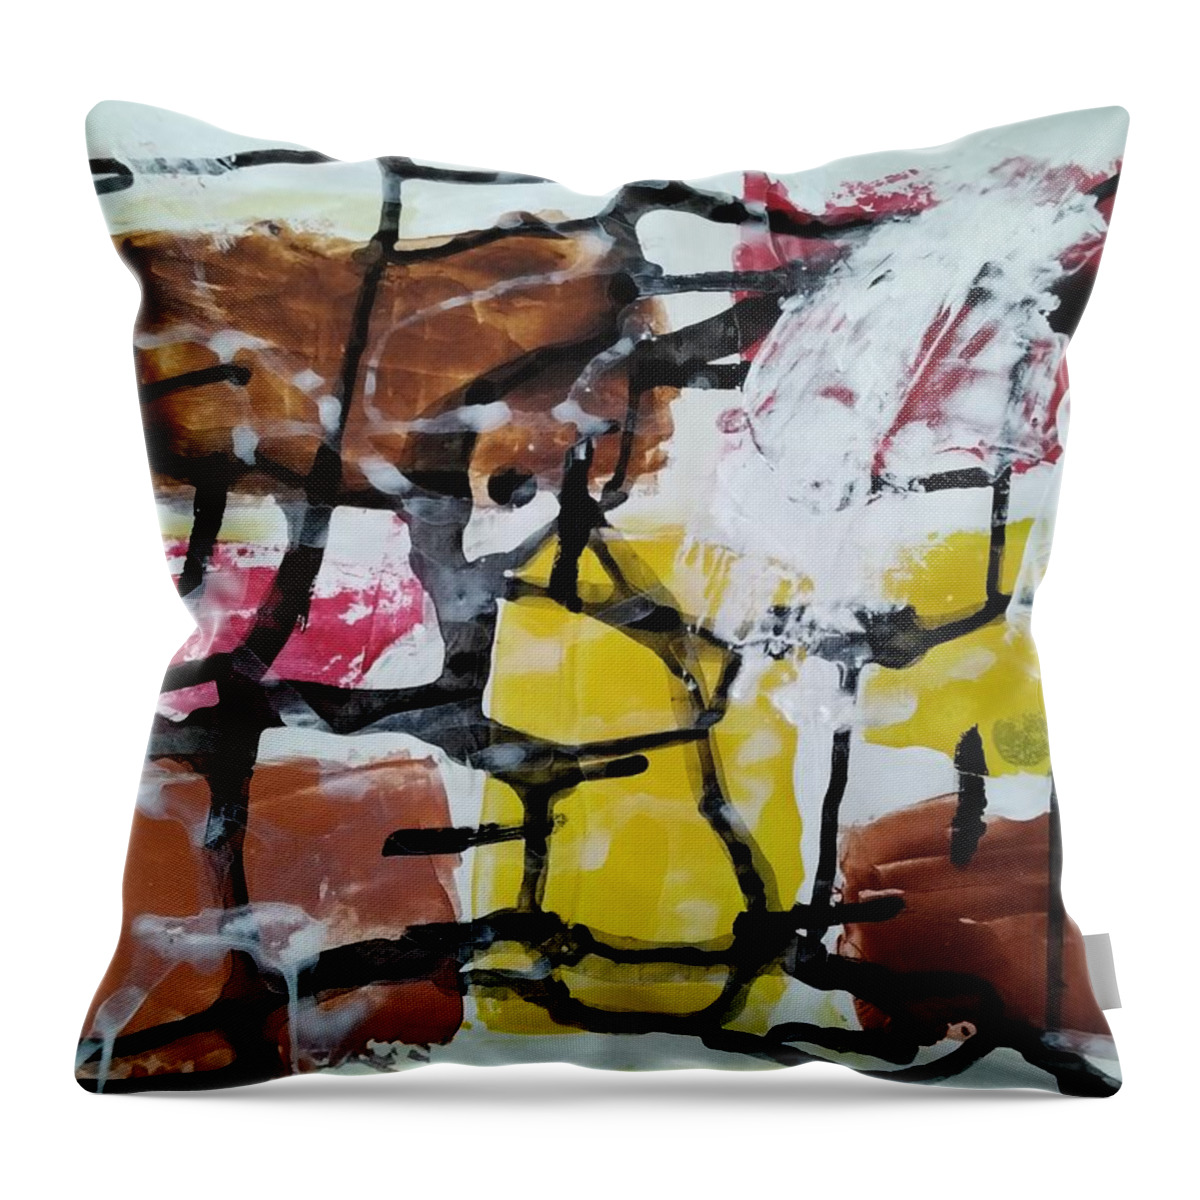  Throw Pillow featuring the painting Caos 21 by Giuseppe Monti